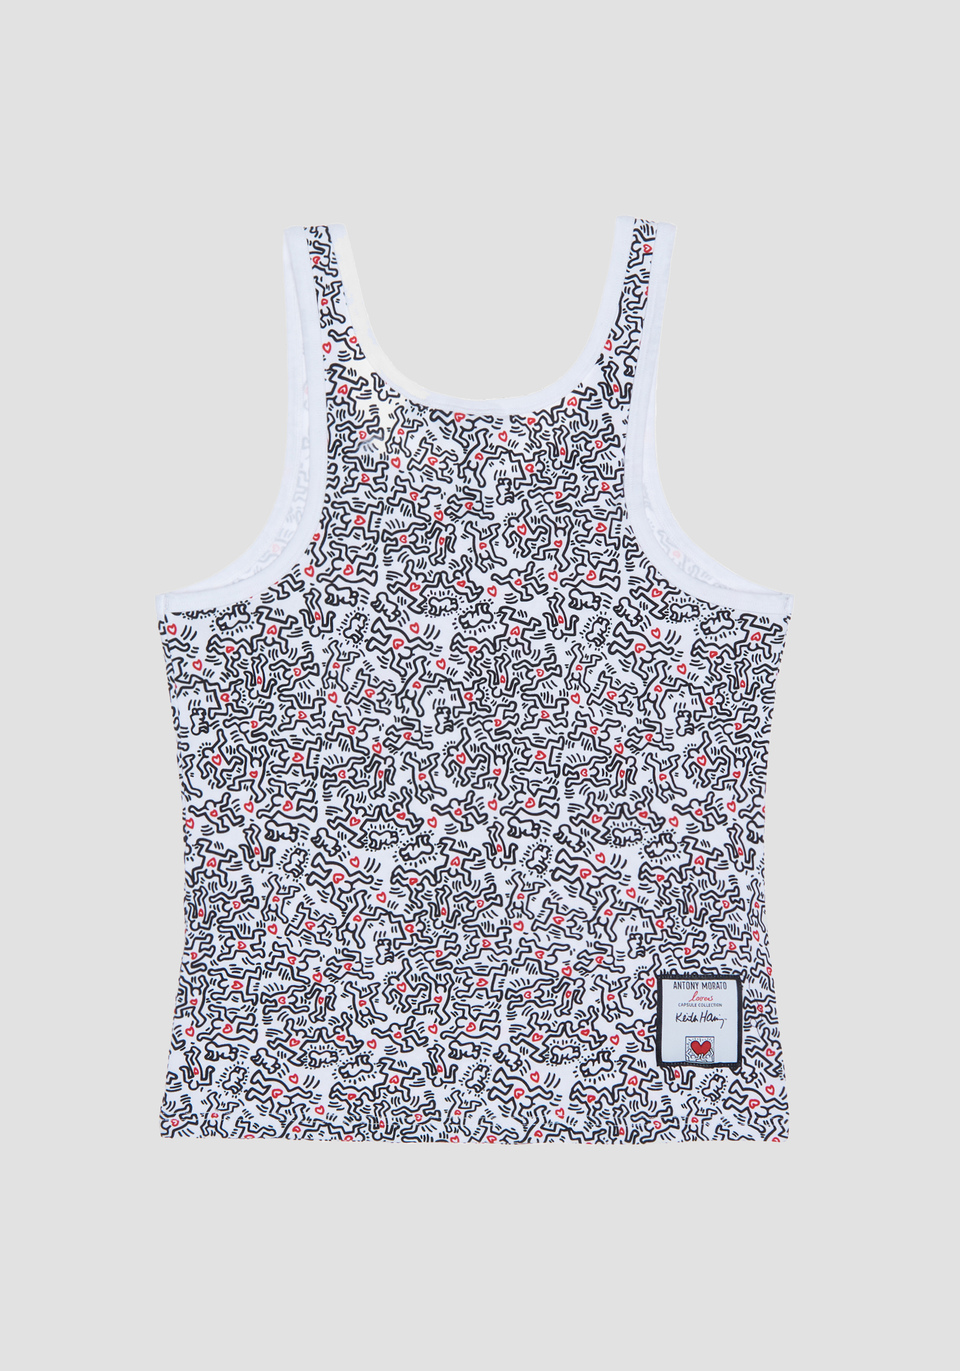 SLIM-FIT TANK TOP WITH ALL-OVER KEITH HARING PRINT - Antony Morato Online Shop